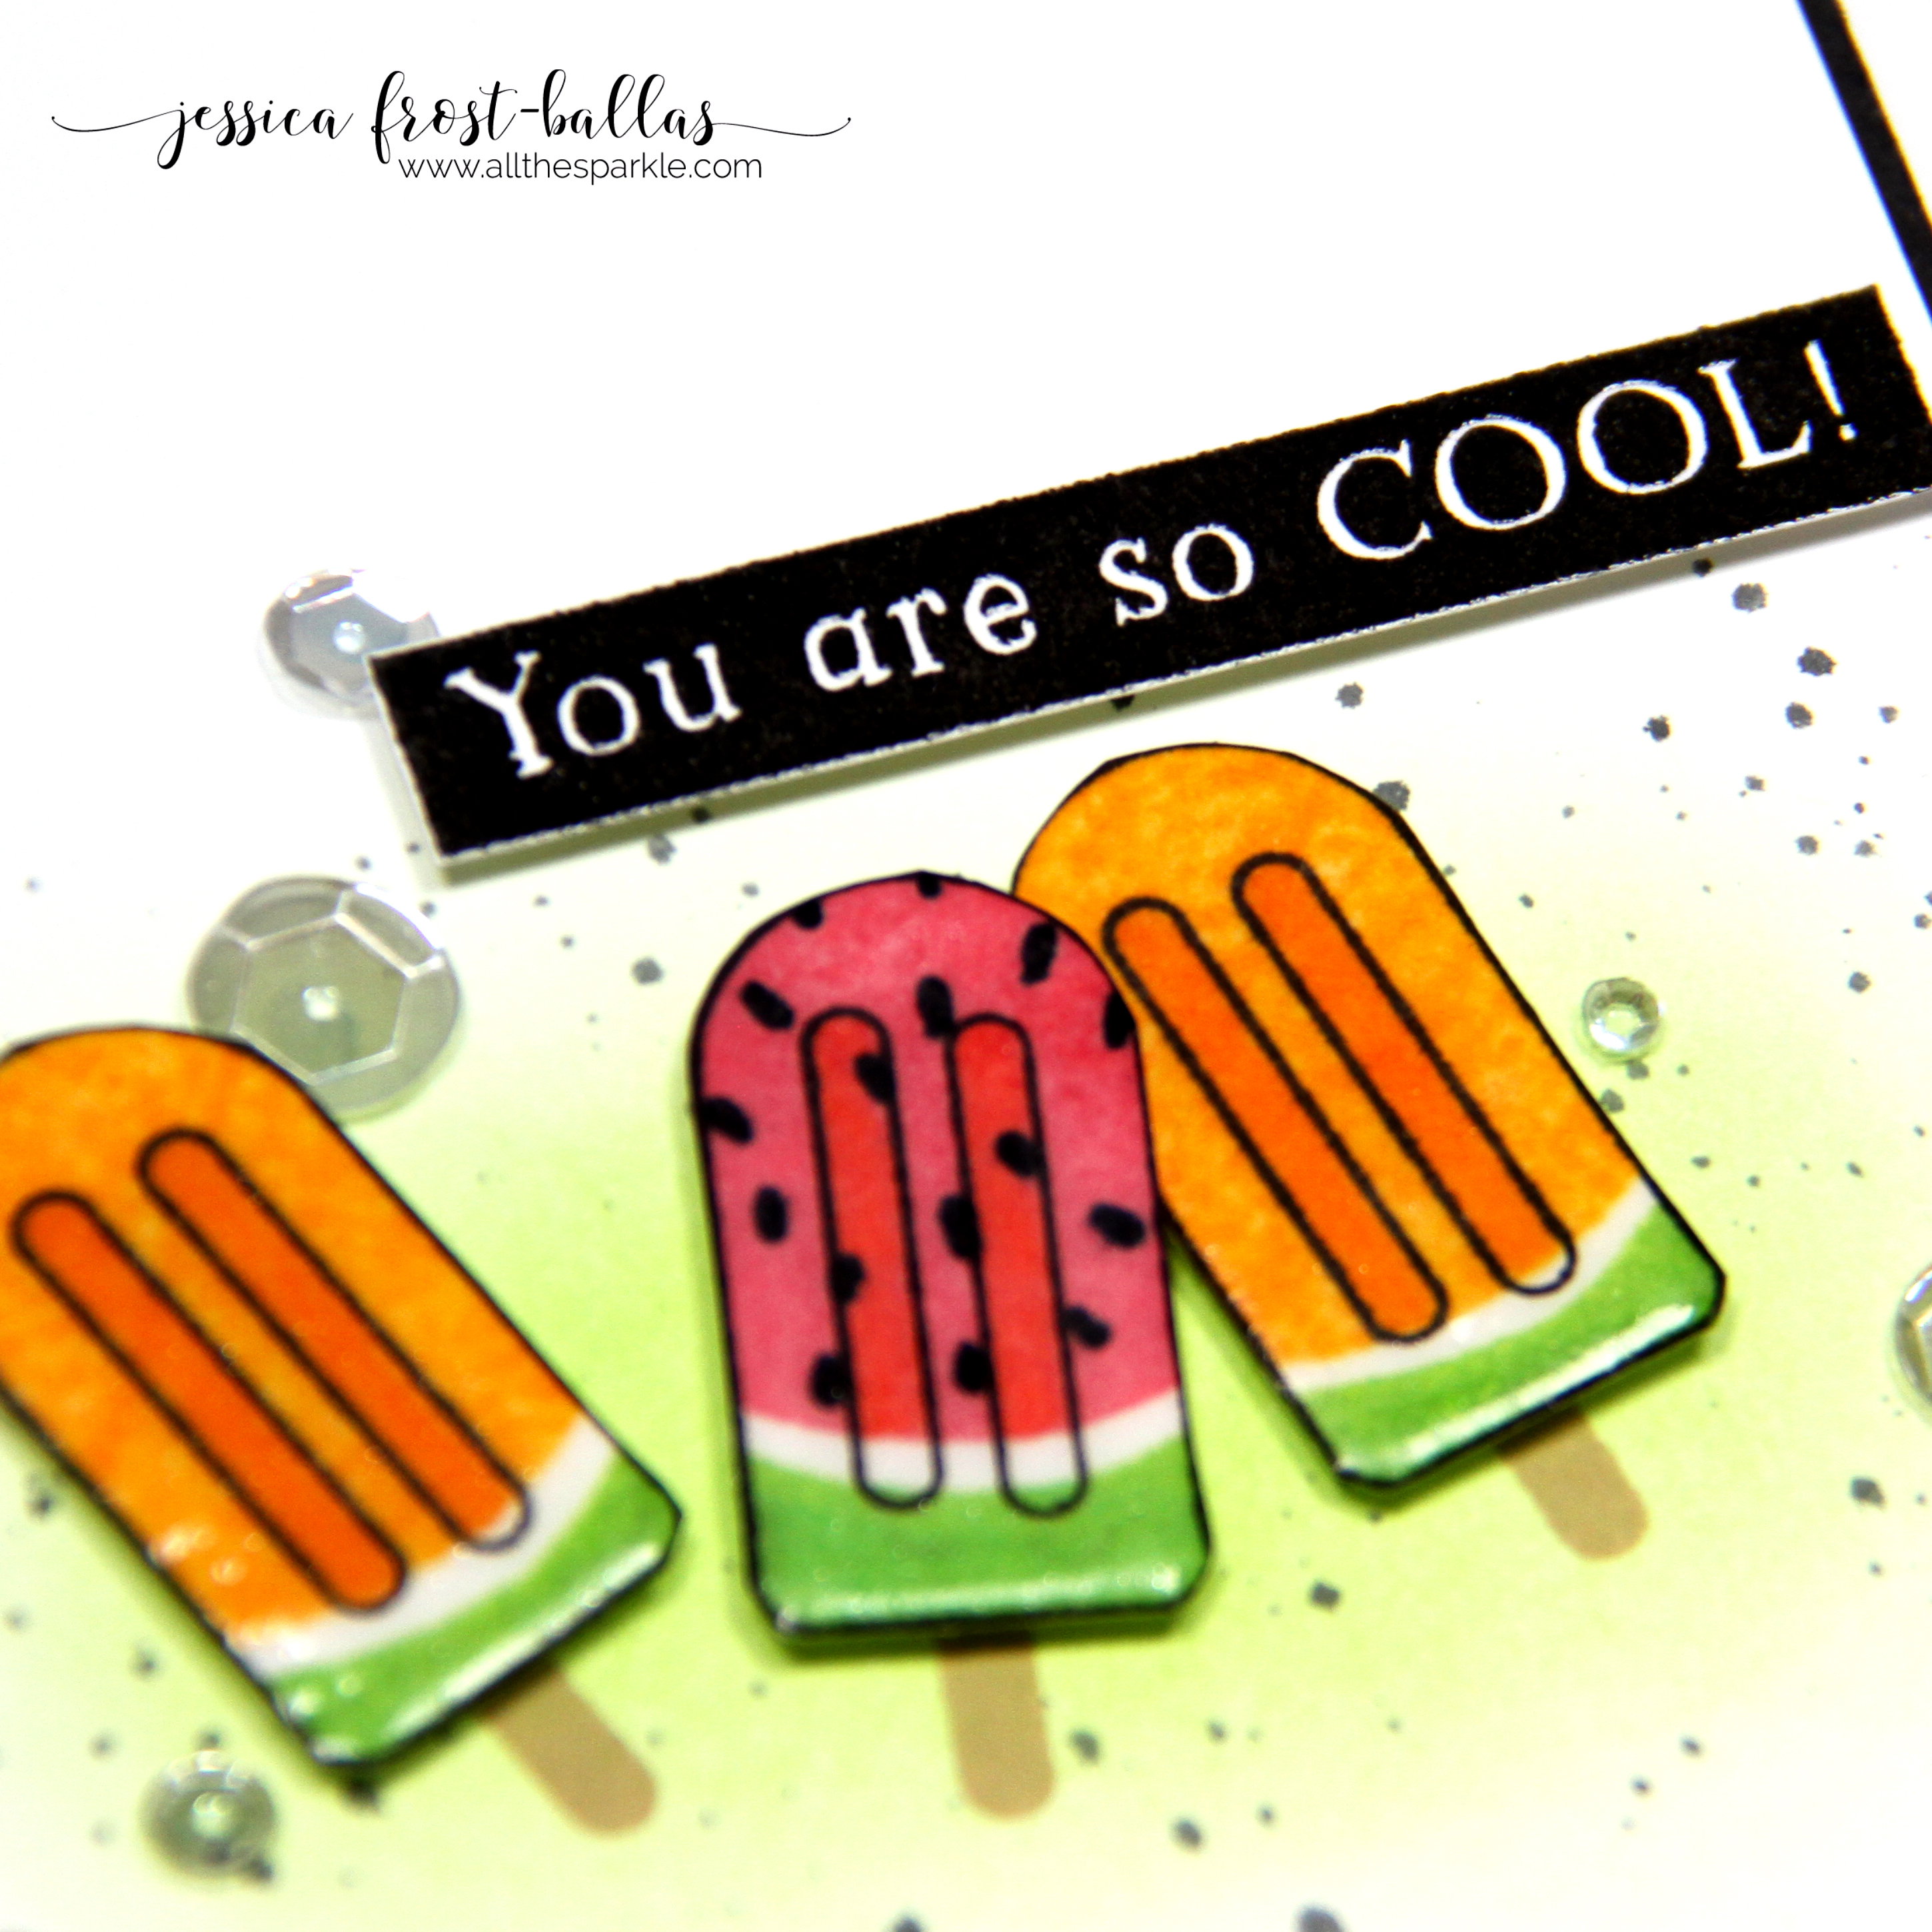 You're So Cool by Jessica Frost-Ballas for Simon Says Stamp